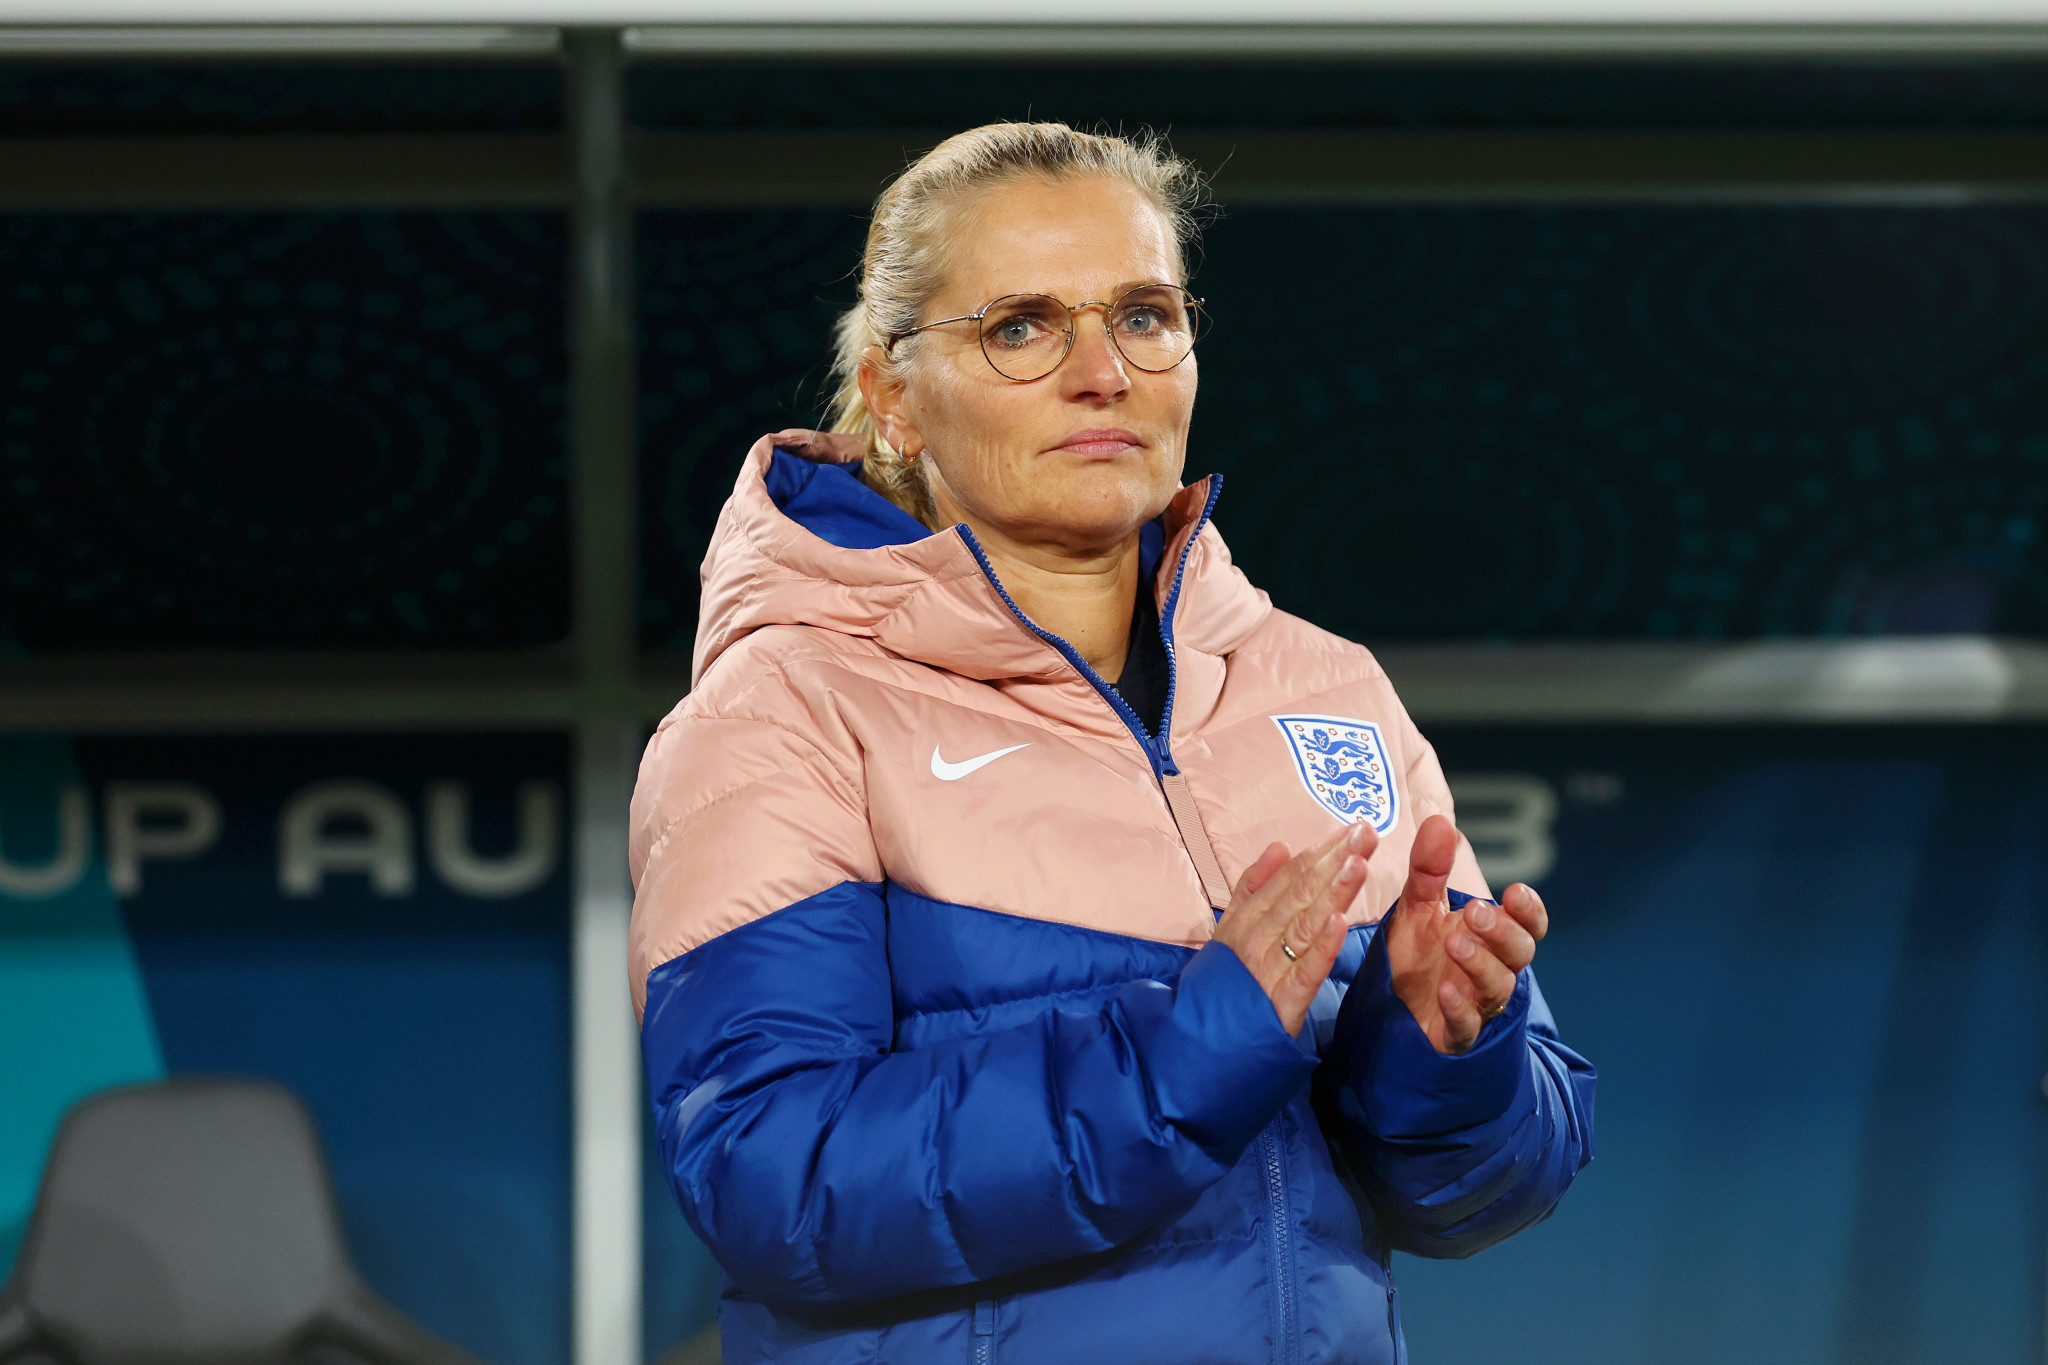 Sarina Wiegman coached the Netherlands when they finished runners-up at the 2019 Women's World Cup, but will be hoping to go one better with England this time around ©Getty Images